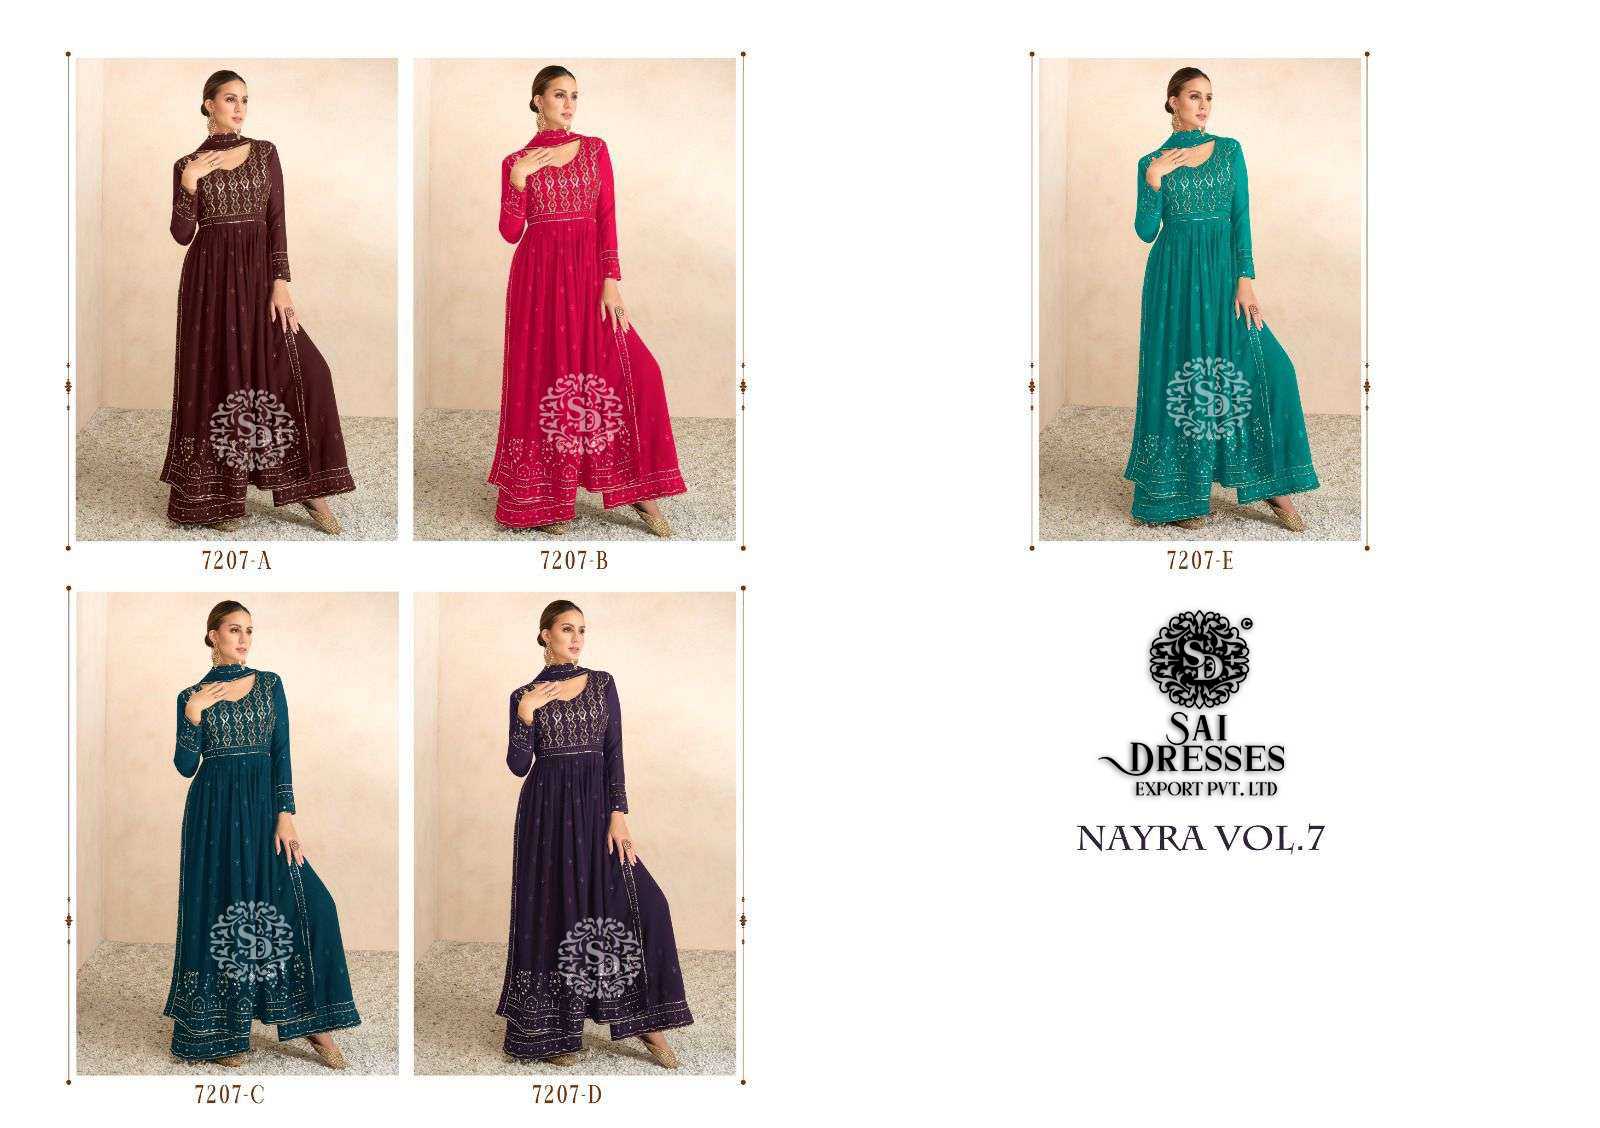 SAI DRESSES PRESENT NAYRA VOL 7 READYMADE PARTY WEAR NAYRA CUT WITH PLAZZO STYLE DESIGNER 3 PIECE SUITS IN WHOLESALE RATE IN SURAT